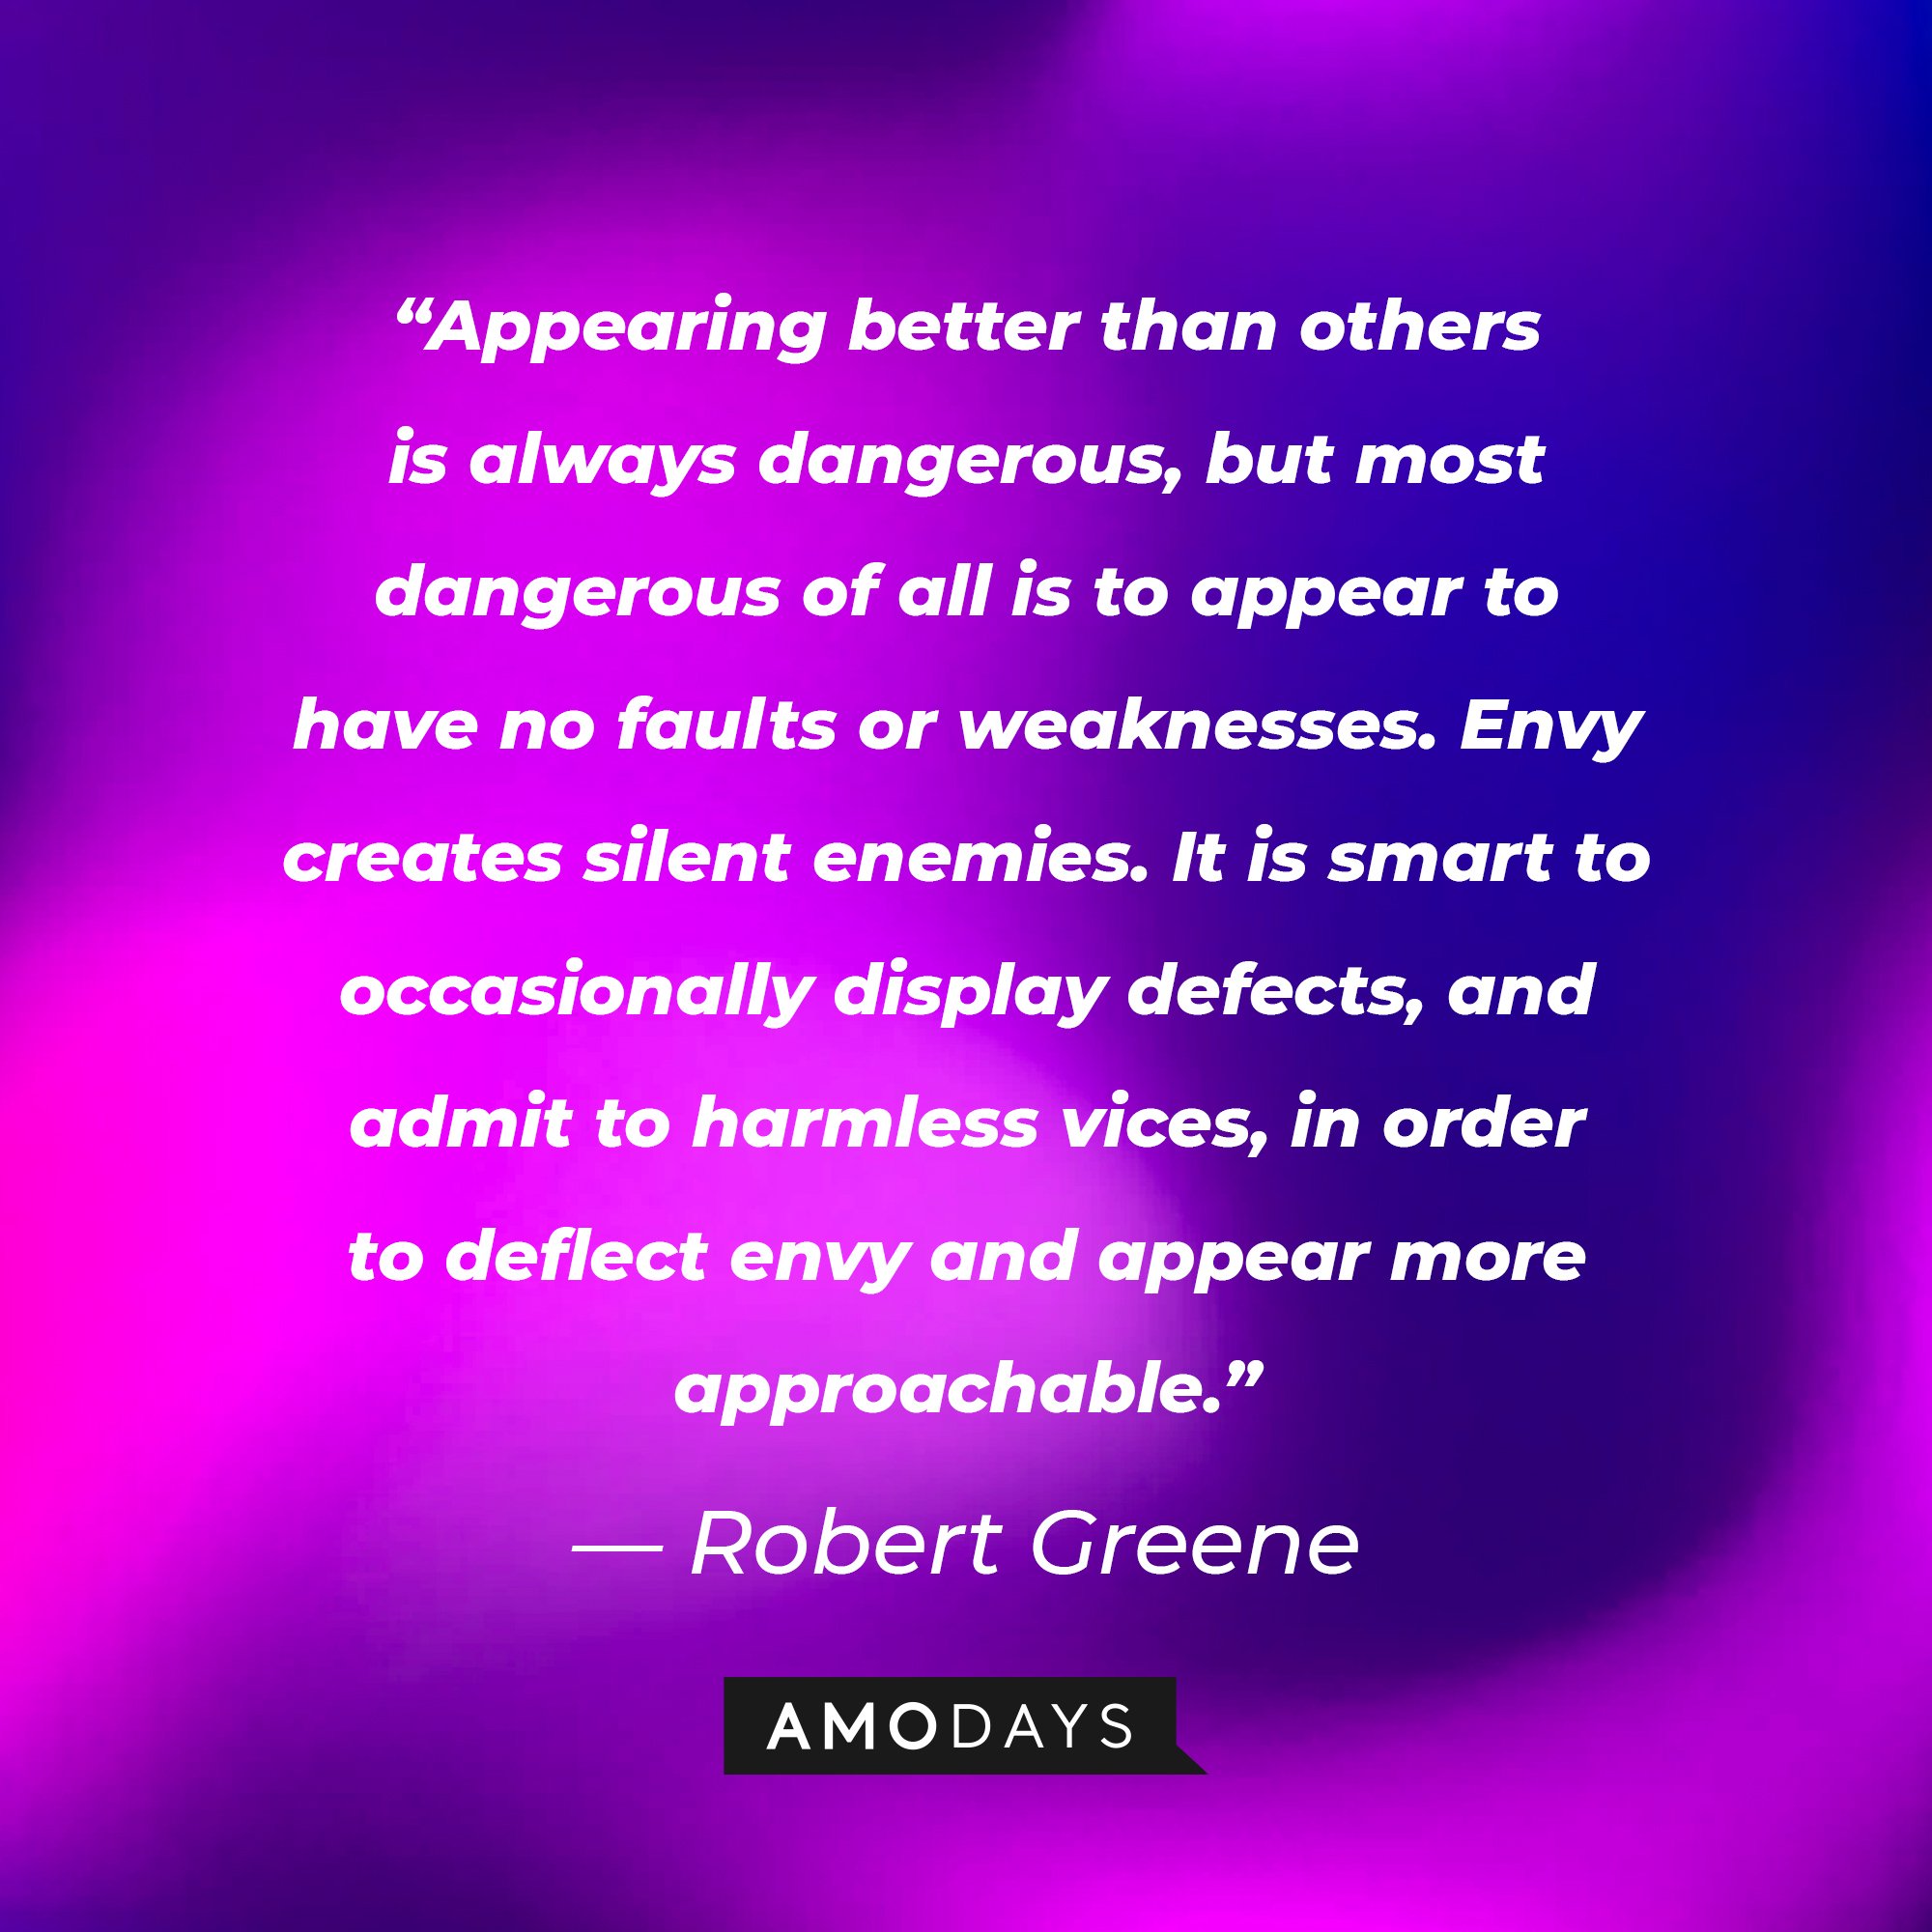  Robert Greene's quote: “Appearing better than others is always dangerous, but most dangerous of all is to appear to have no faults or weaknesses. Envy creates silent enemies. It is smart to occasionally display defects, and admit to harmless vices, in order to deflect envy and appear more approachable.” | Image: AmoDays